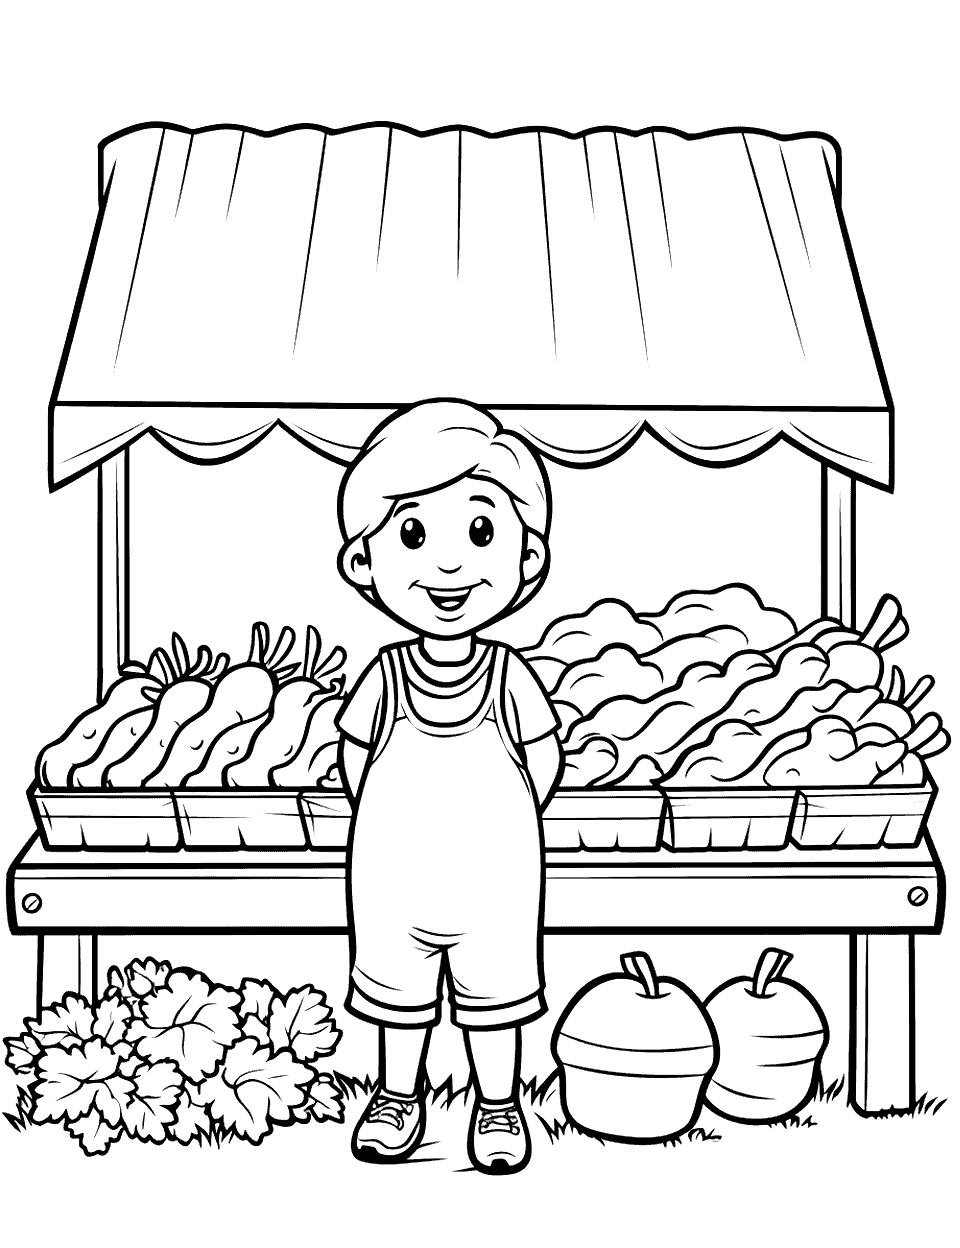 Farmer's Market Stand Farm Coloring Page - A stand filled with fresh farm produce.